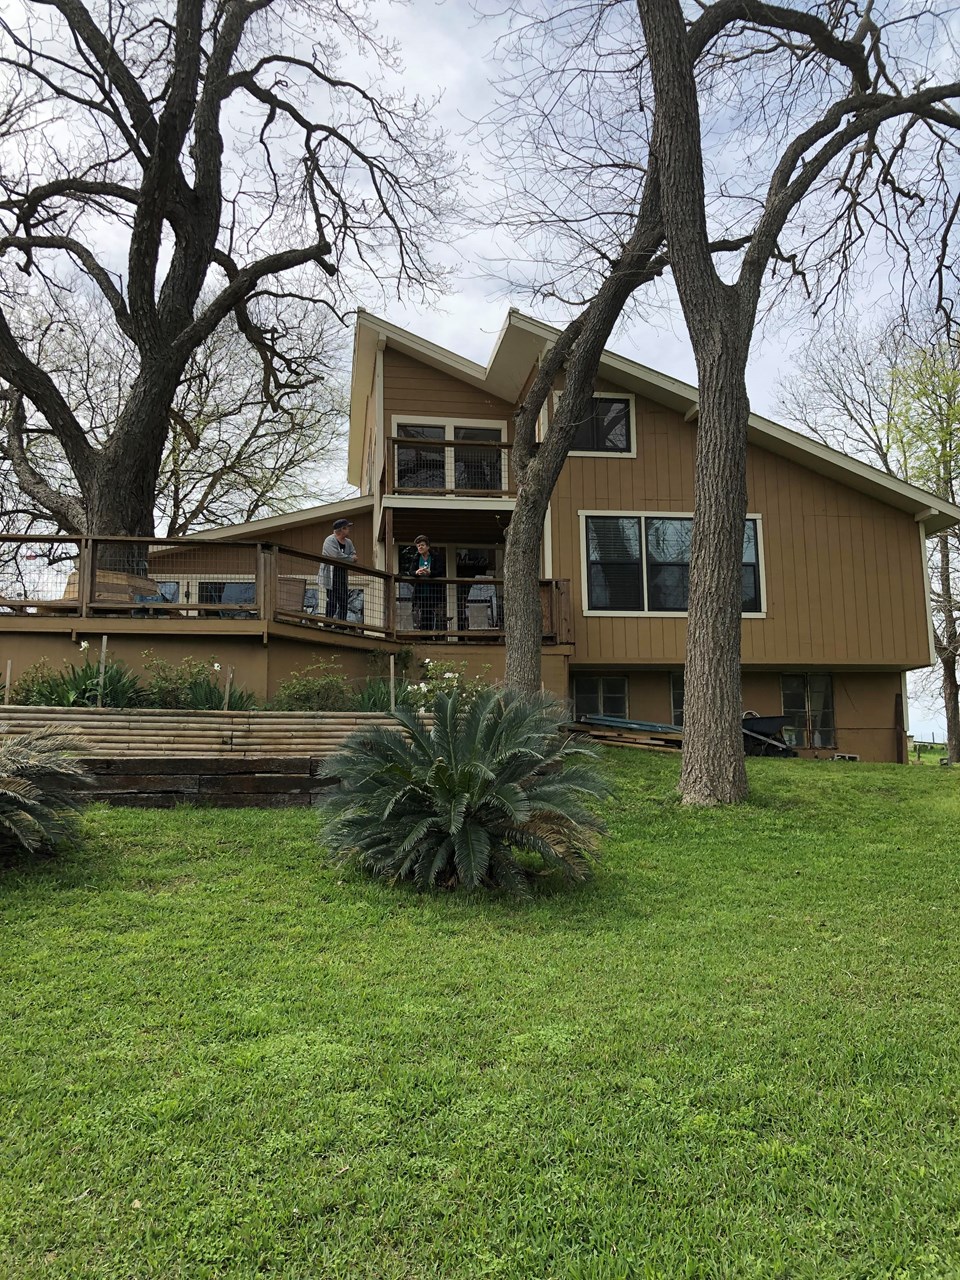 home on the guadalupe river this home has 4 bedrooms 3 bathrooms fireplace beautiful patios.